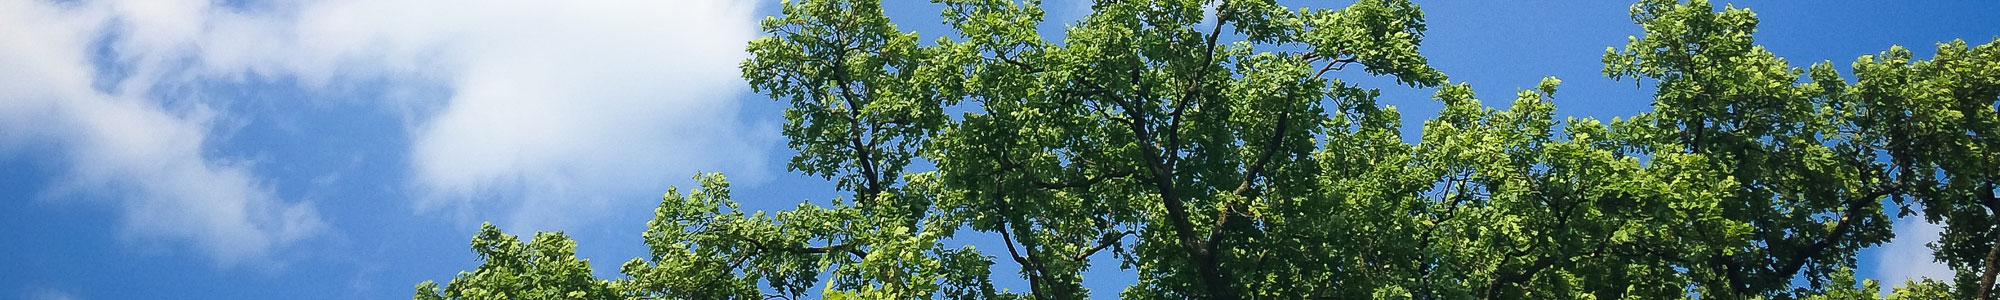 Image of summer day with tree in blue sky.